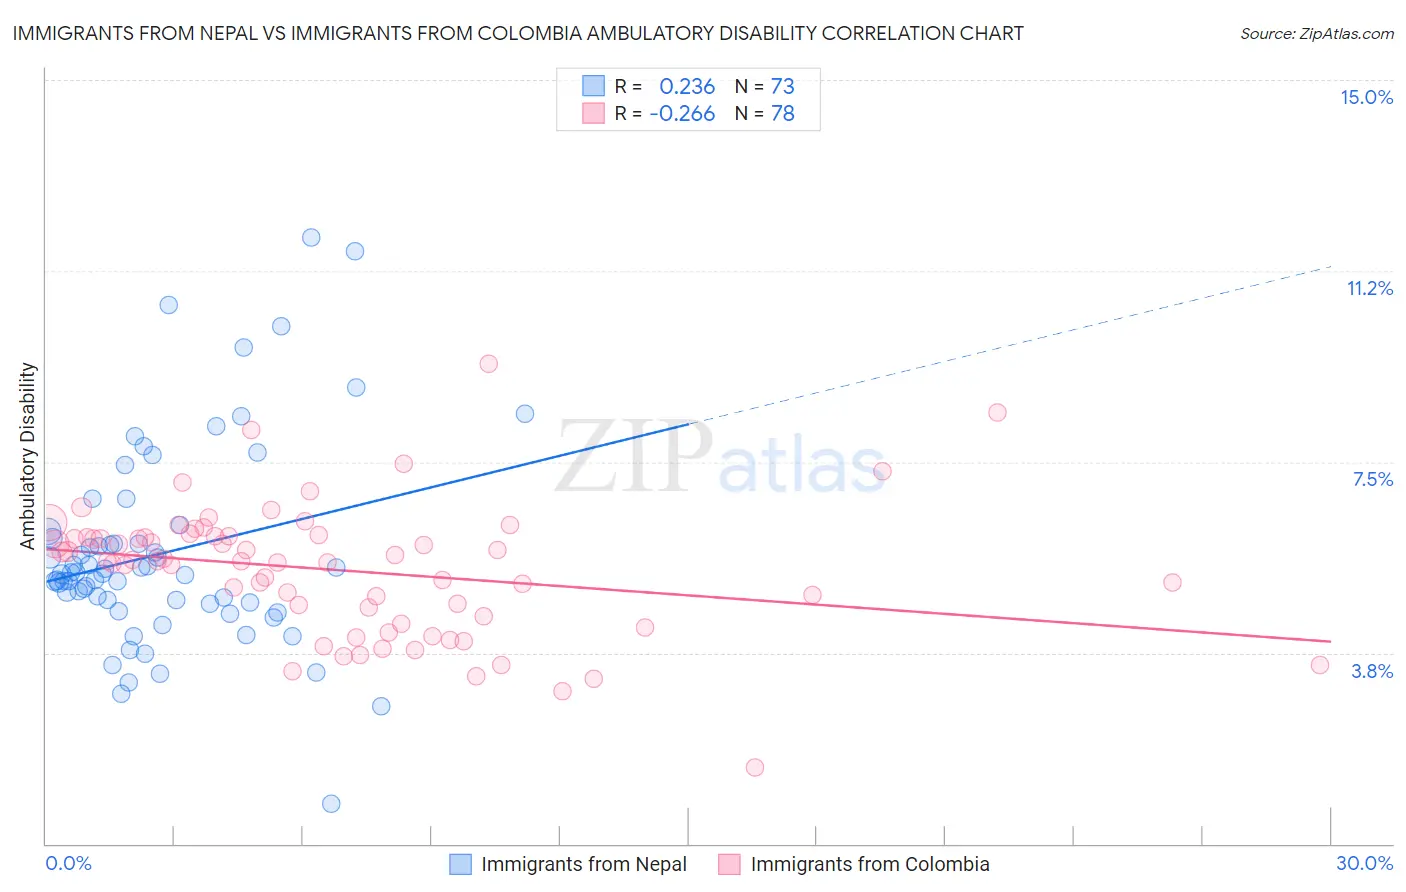 Immigrants from Nepal vs Immigrants from Colombia Ambulatory Disability